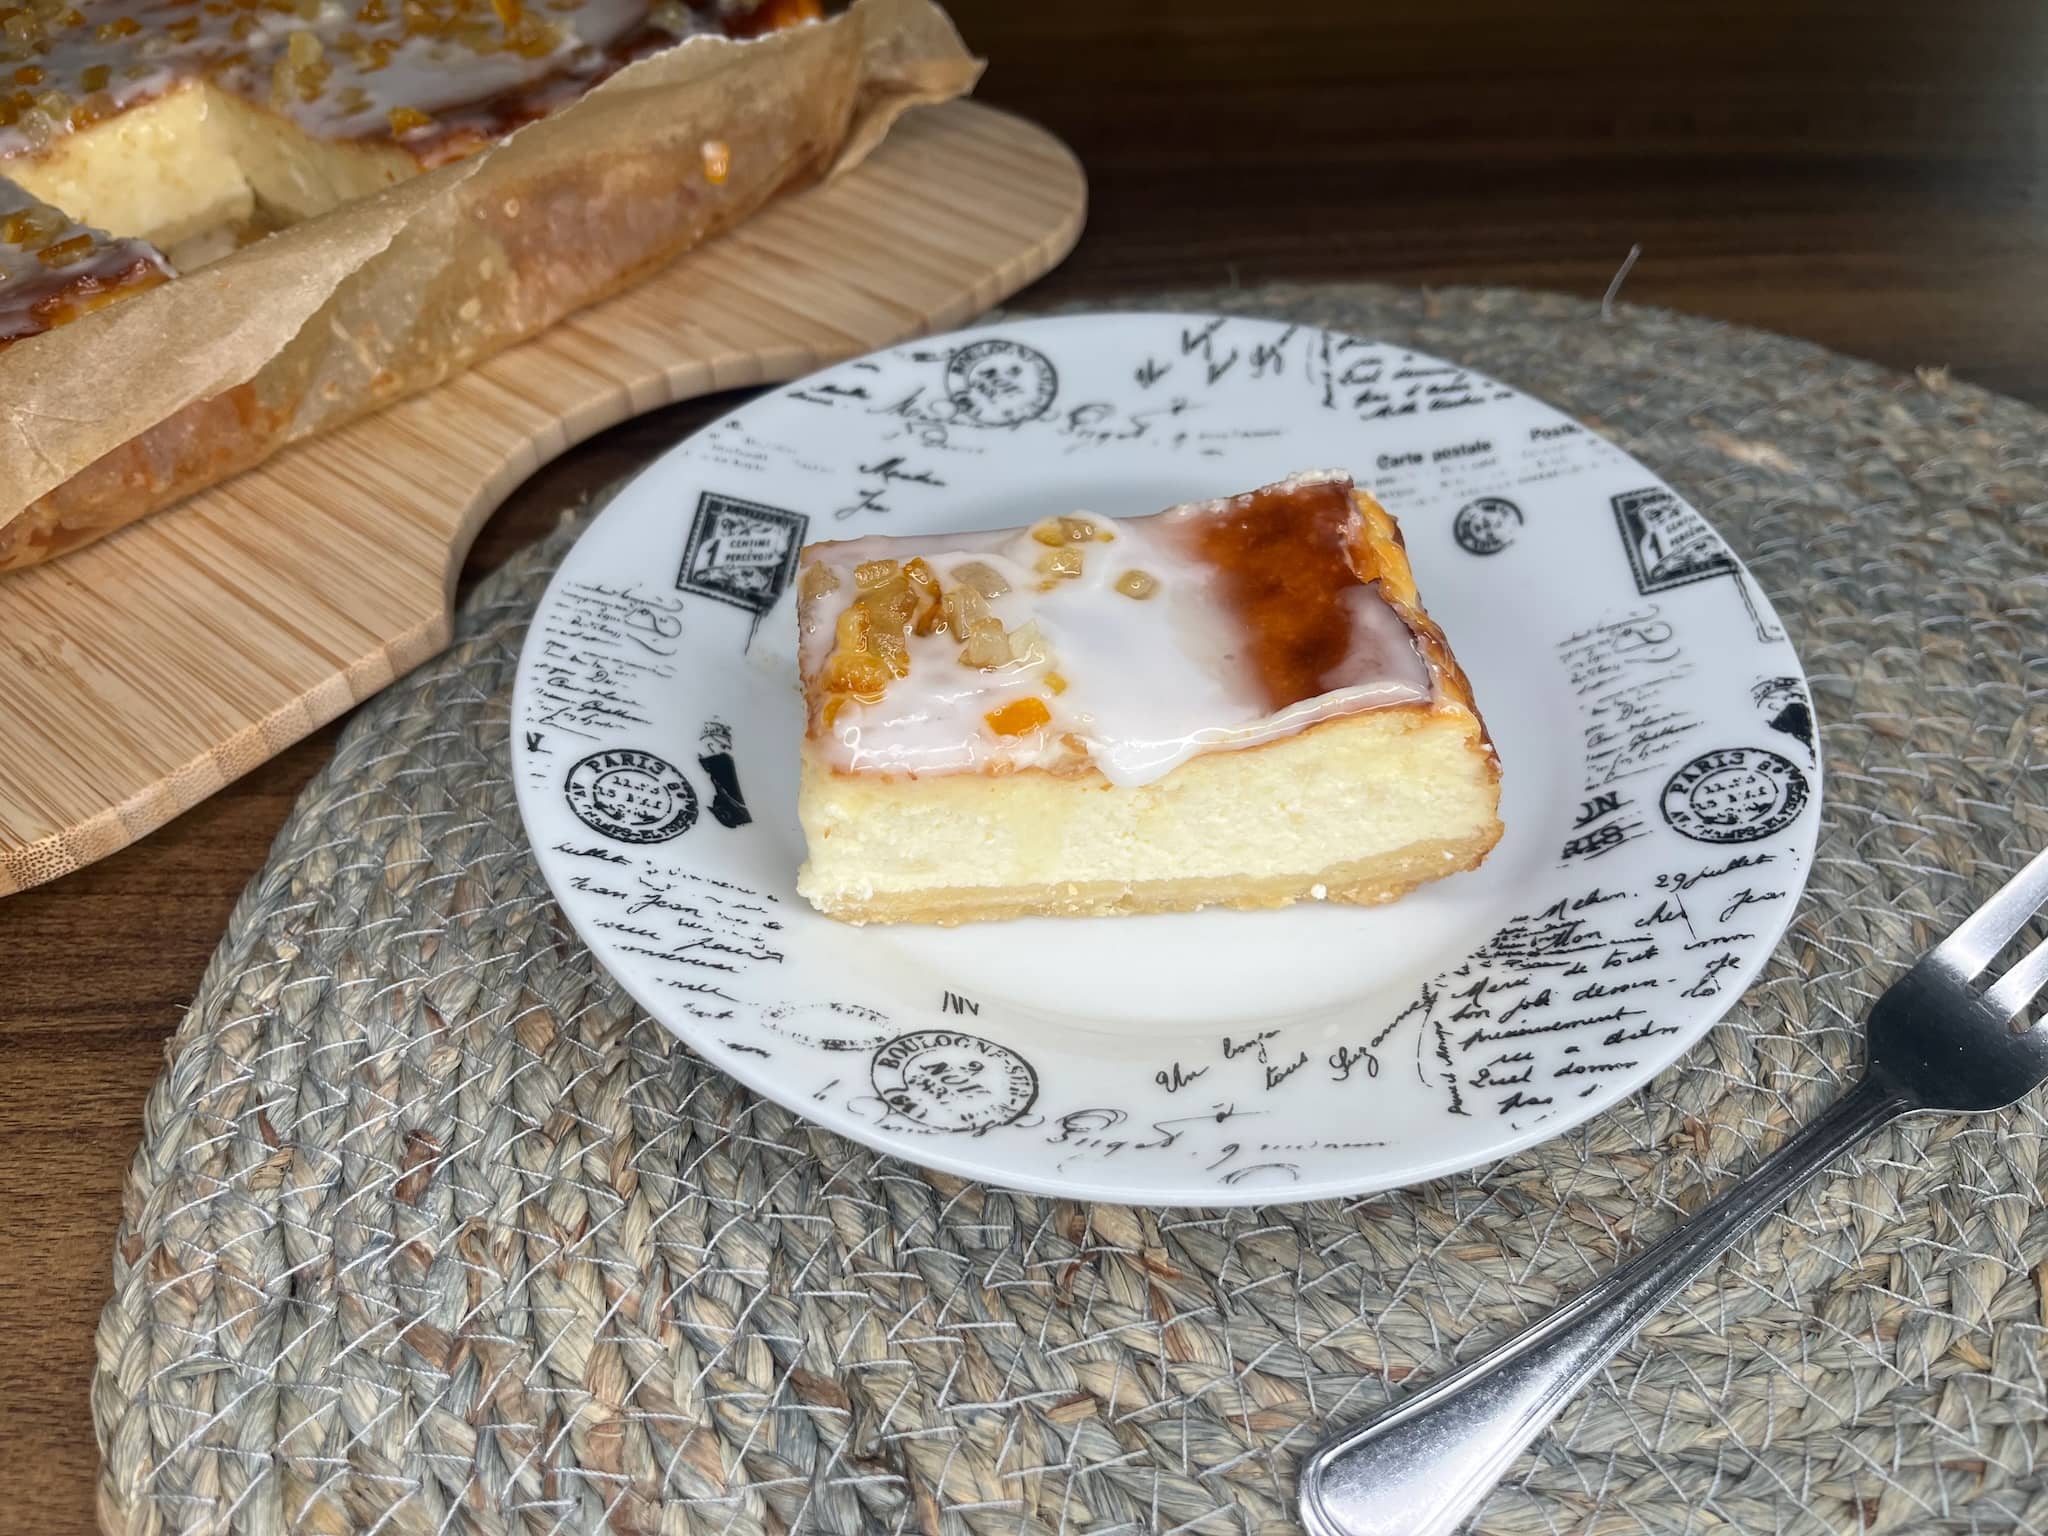 A slice of Baked Lemon Cheesecake on a plate